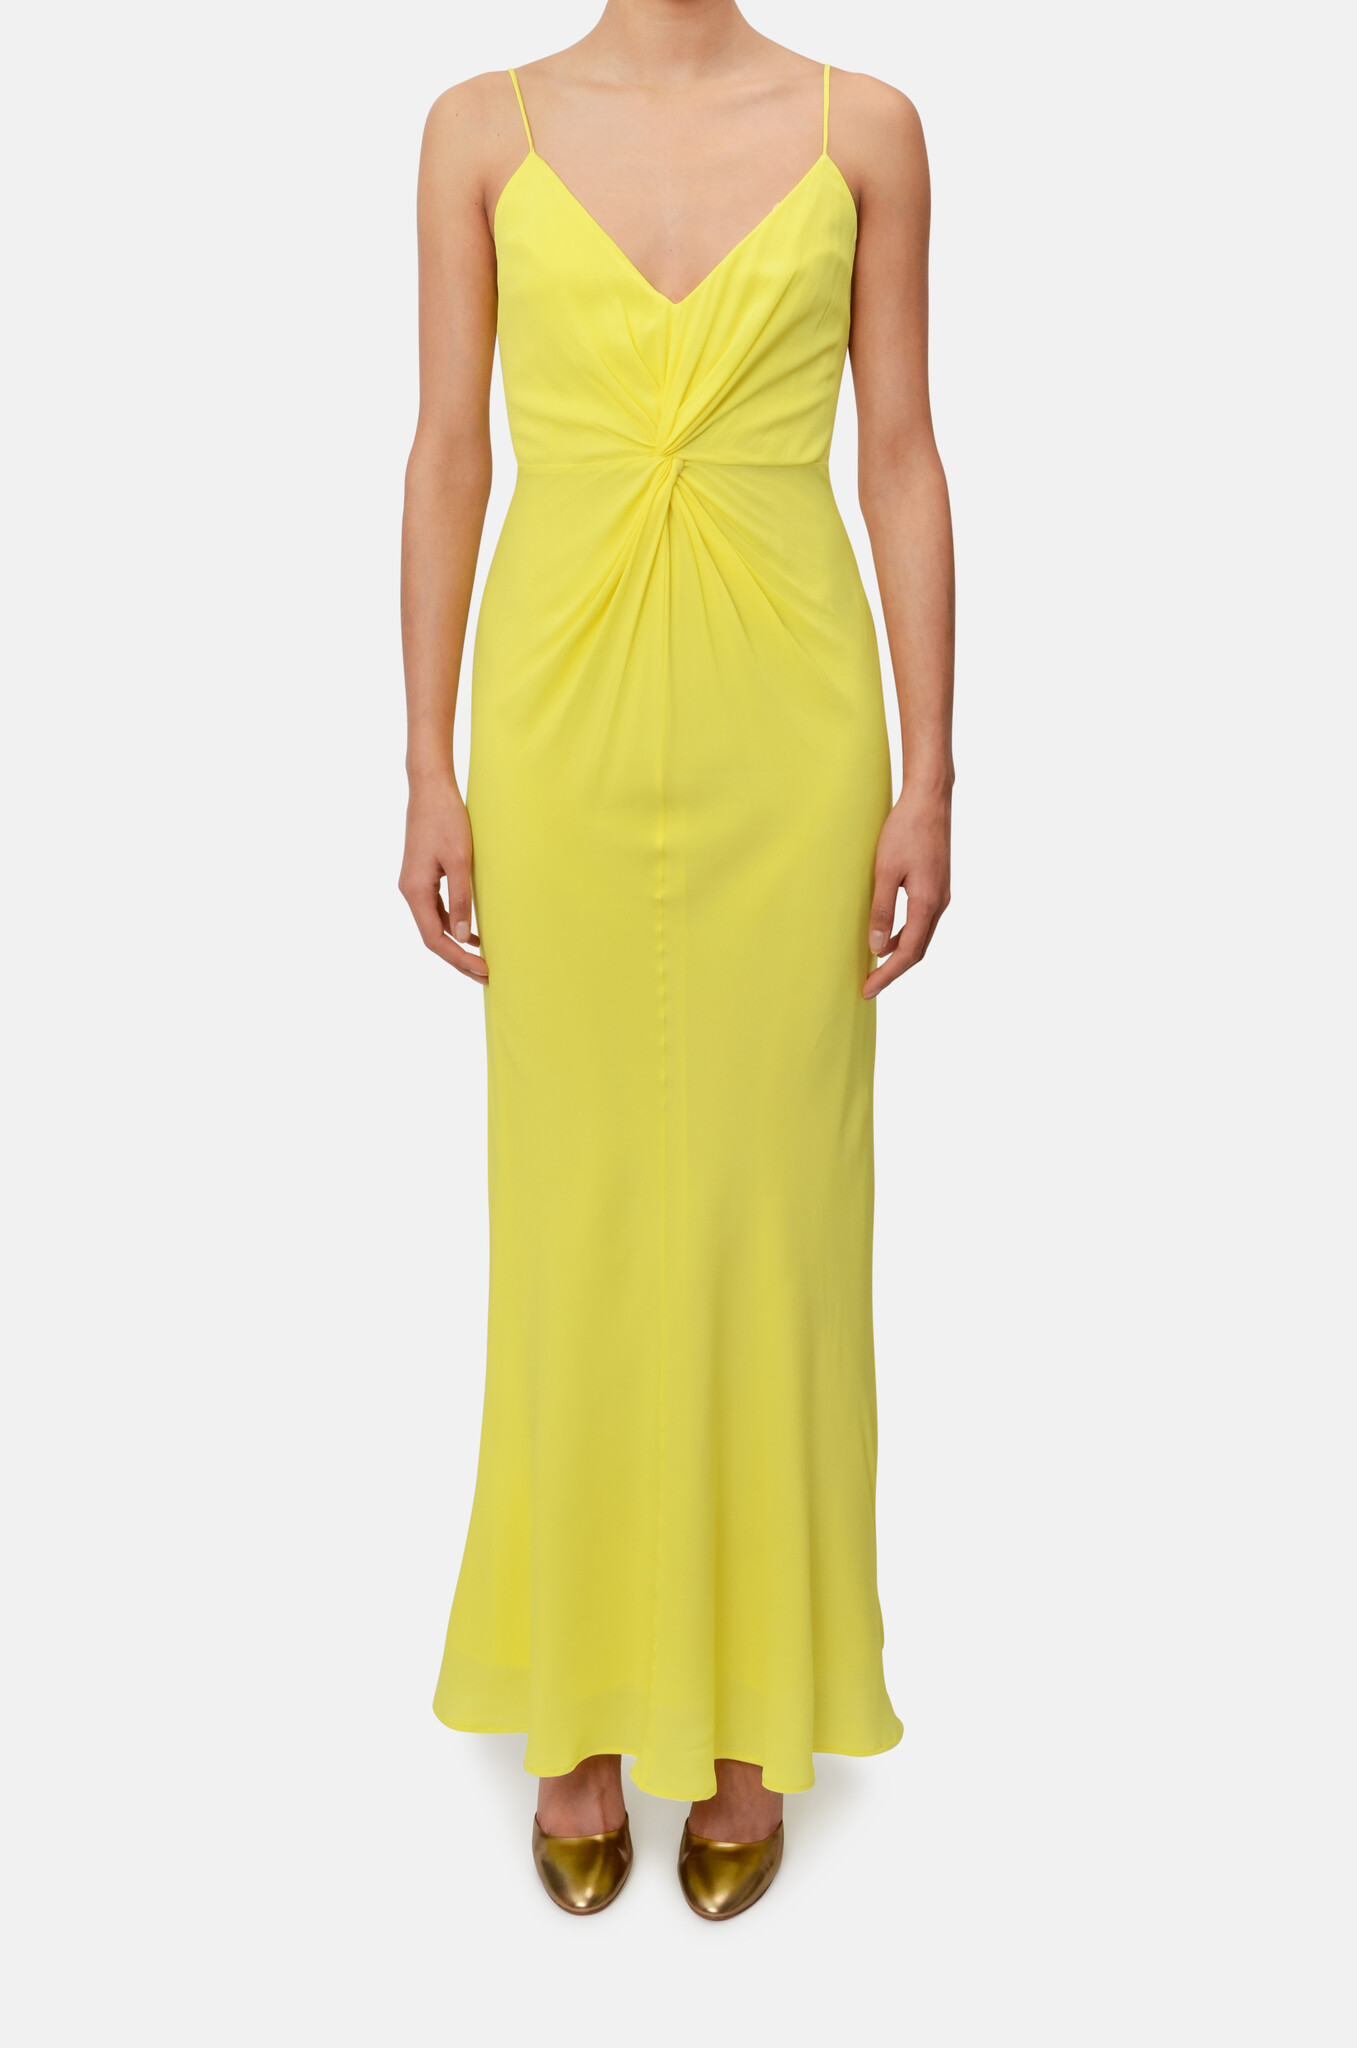 Twisted Front Slipdress in Bright Yellow-1